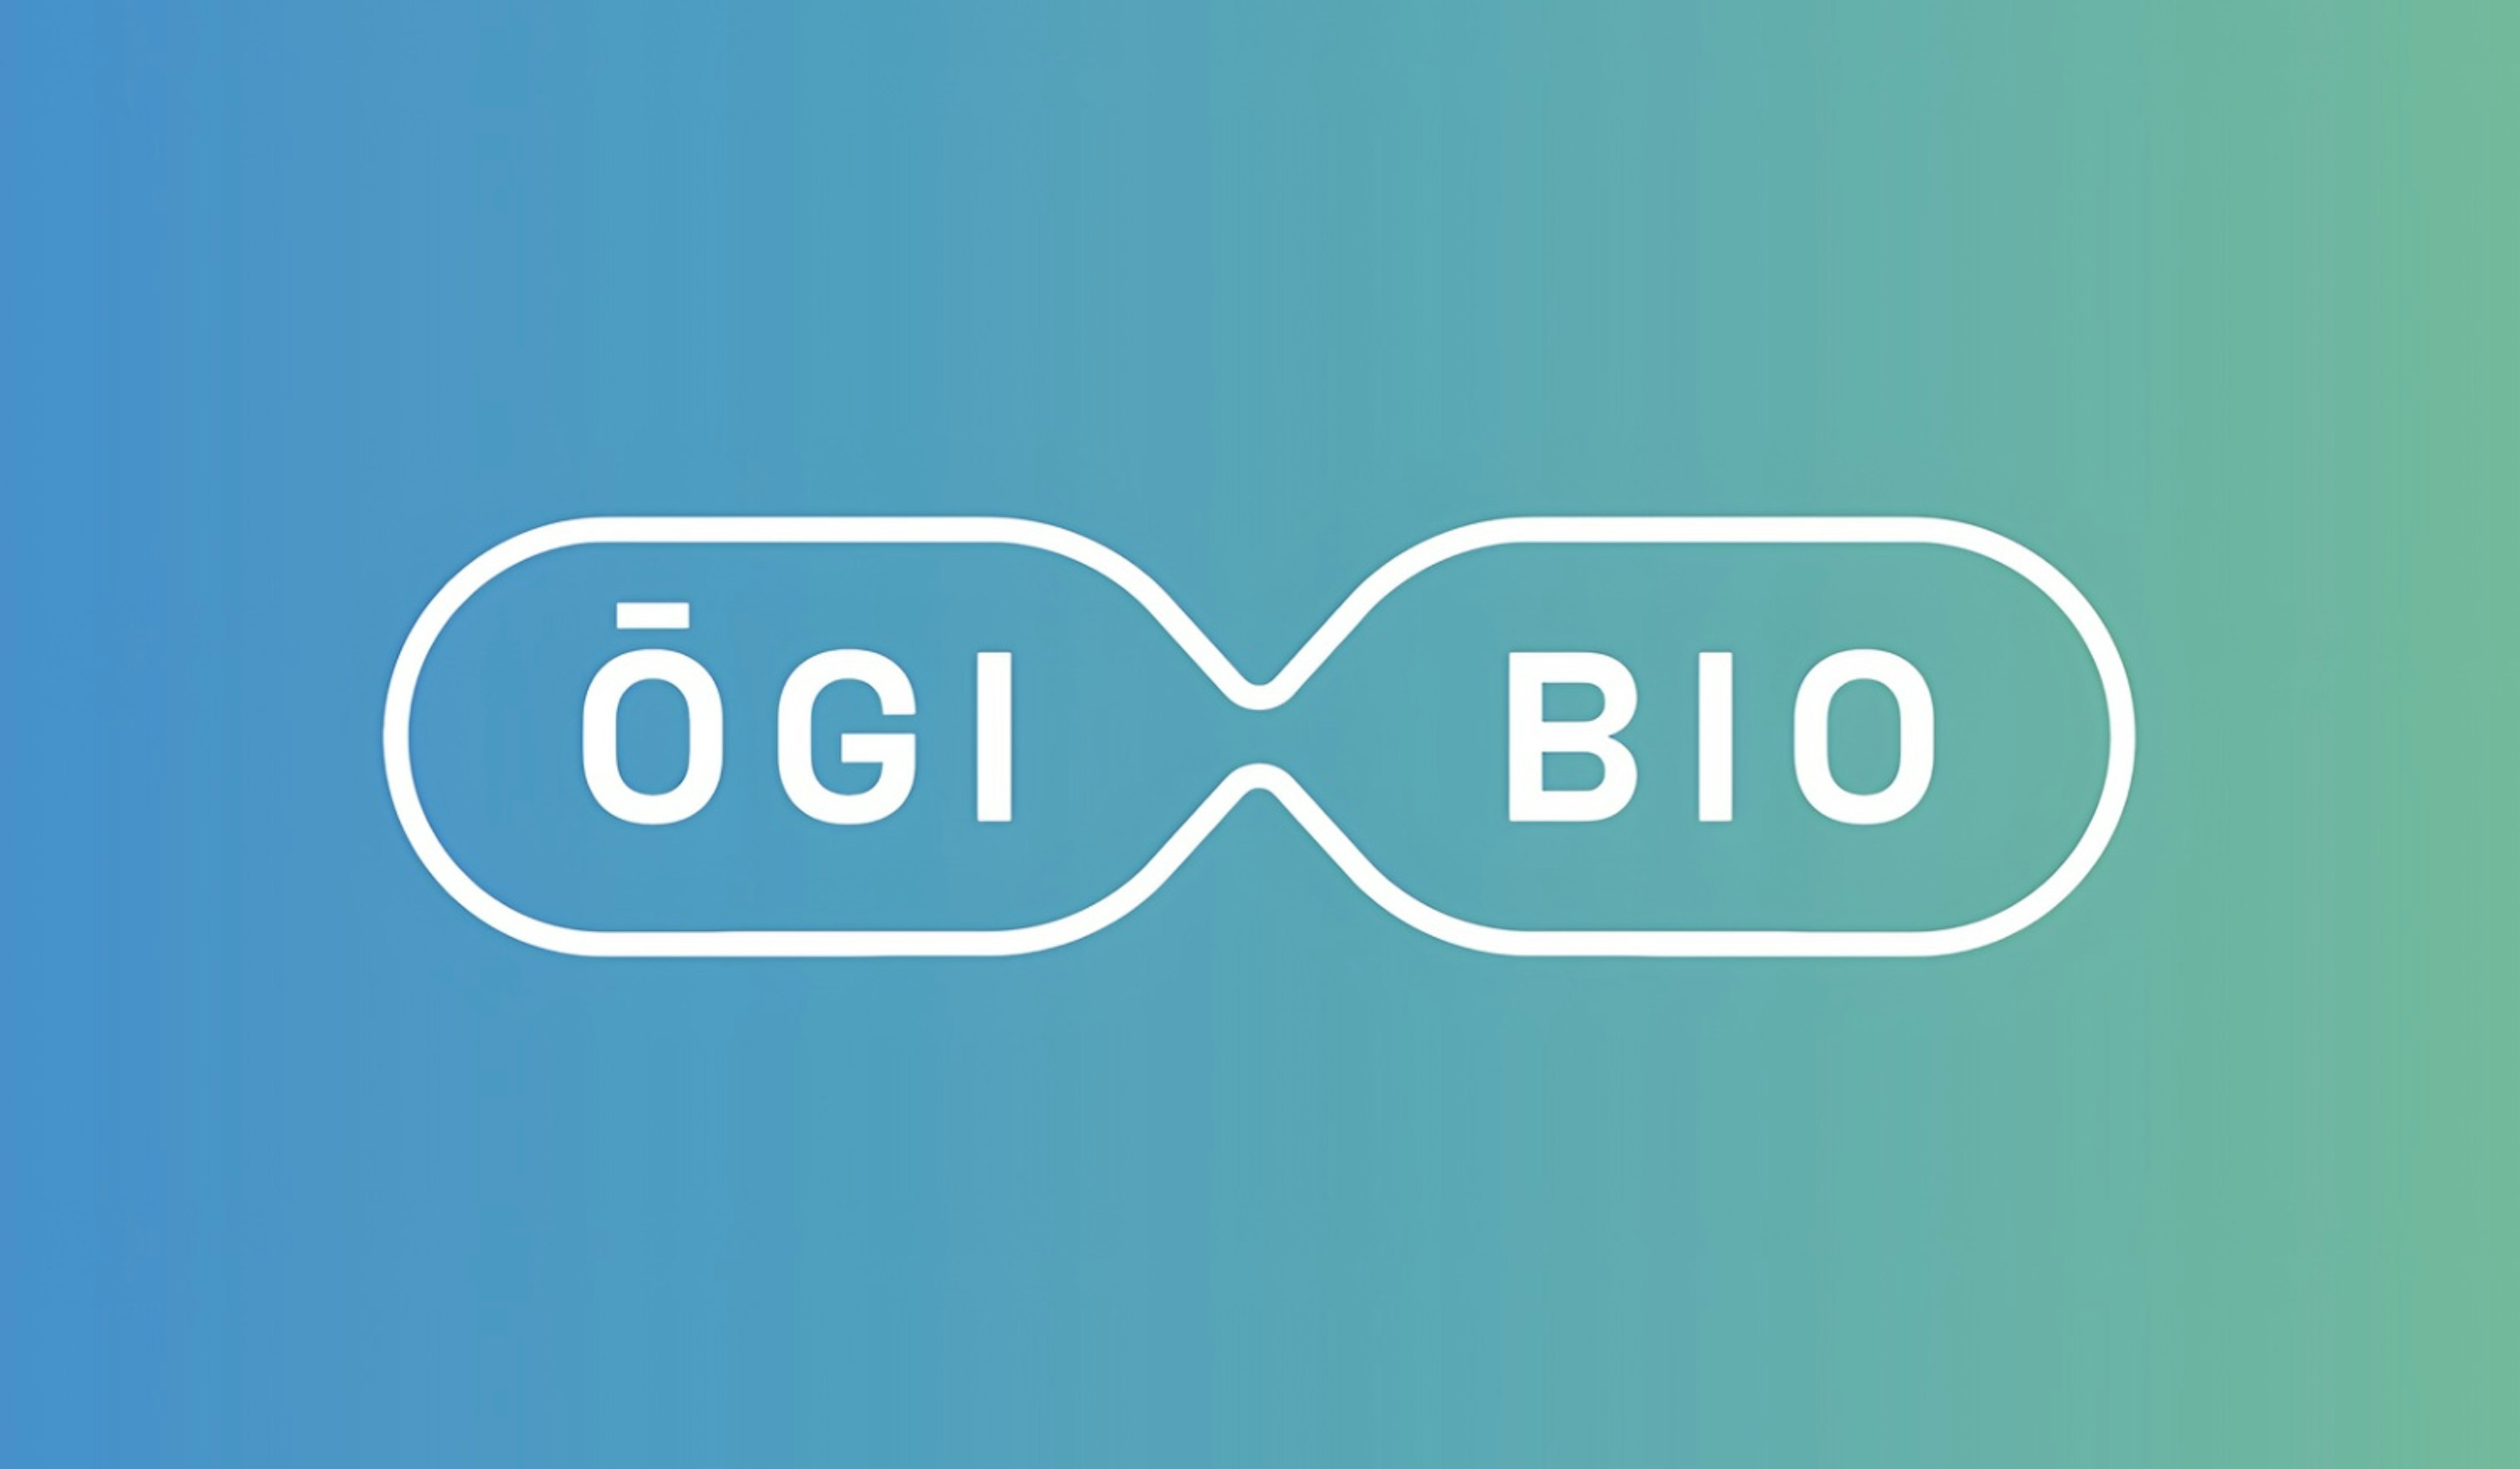 OGI Bio selects Opvia's GxP OS to manage quality in microbial automation